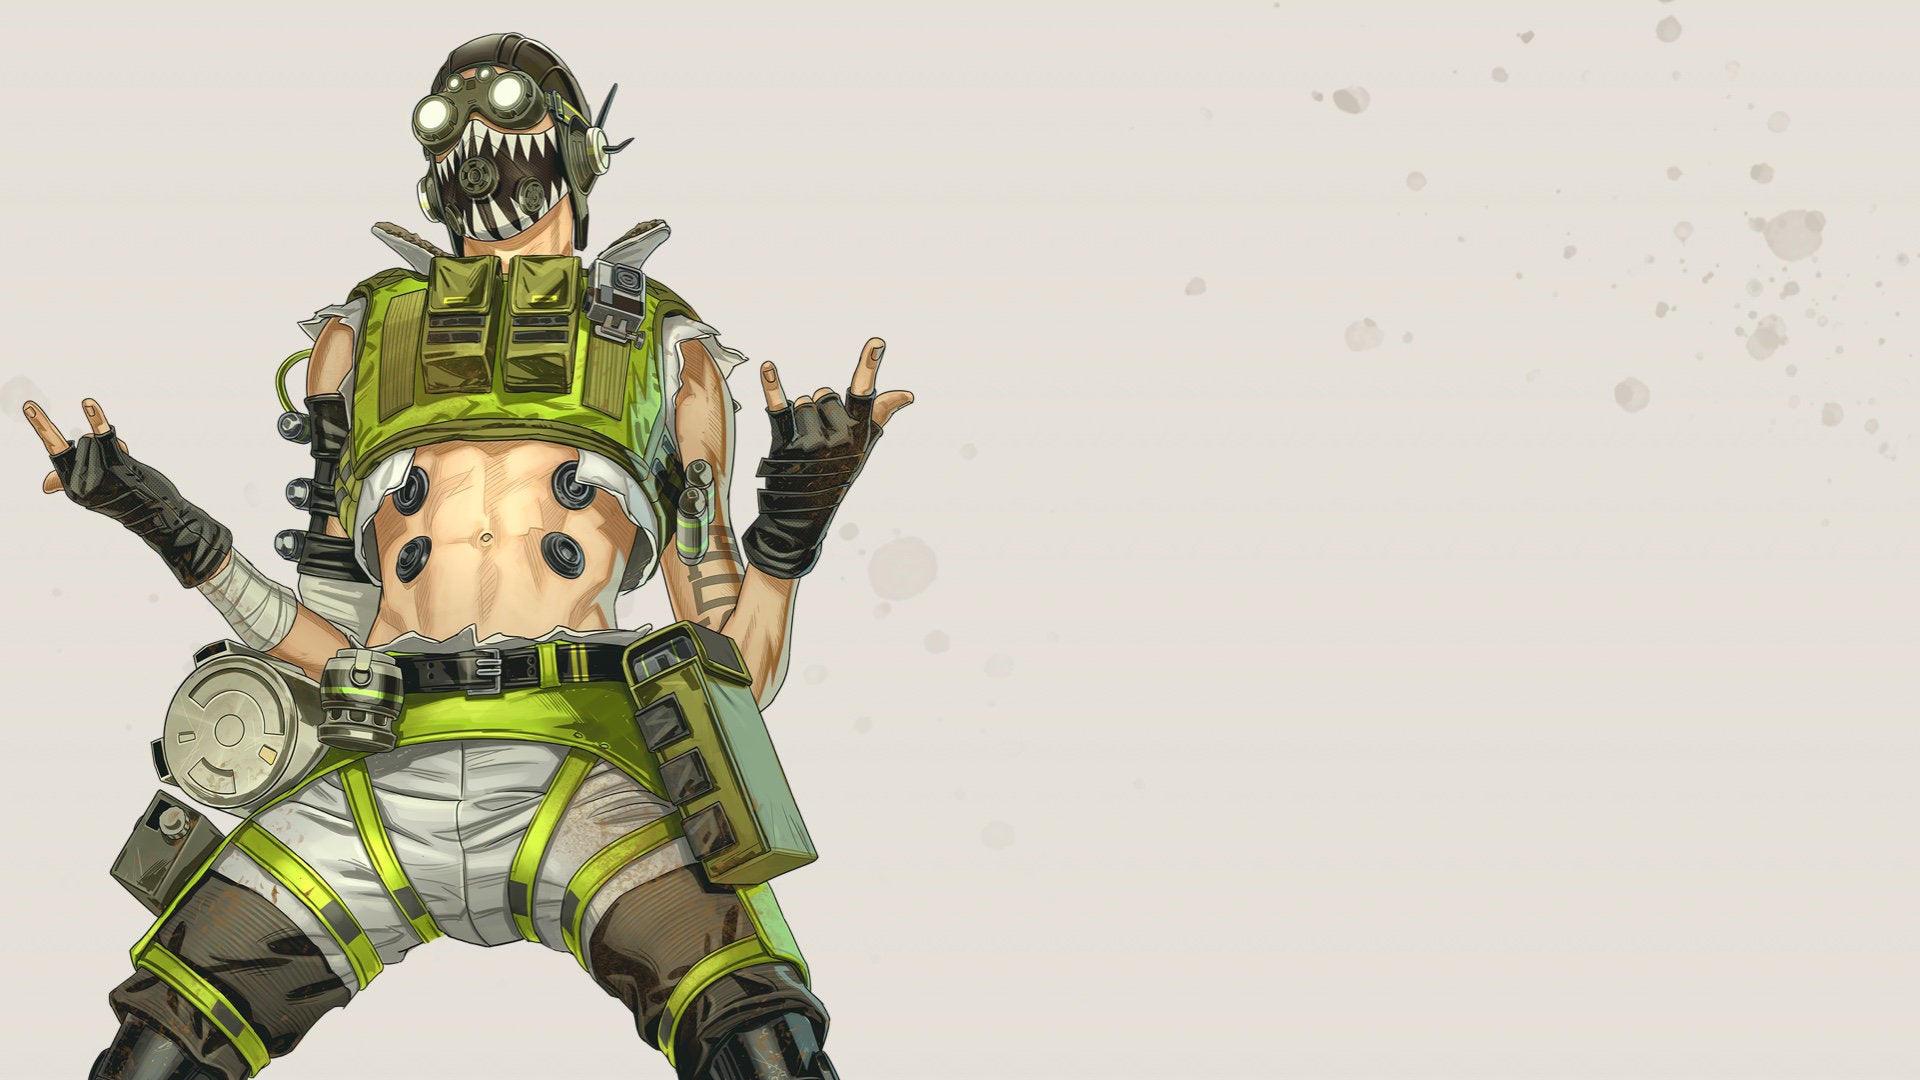 Official art of Octane, one of the Apex Legends characters.